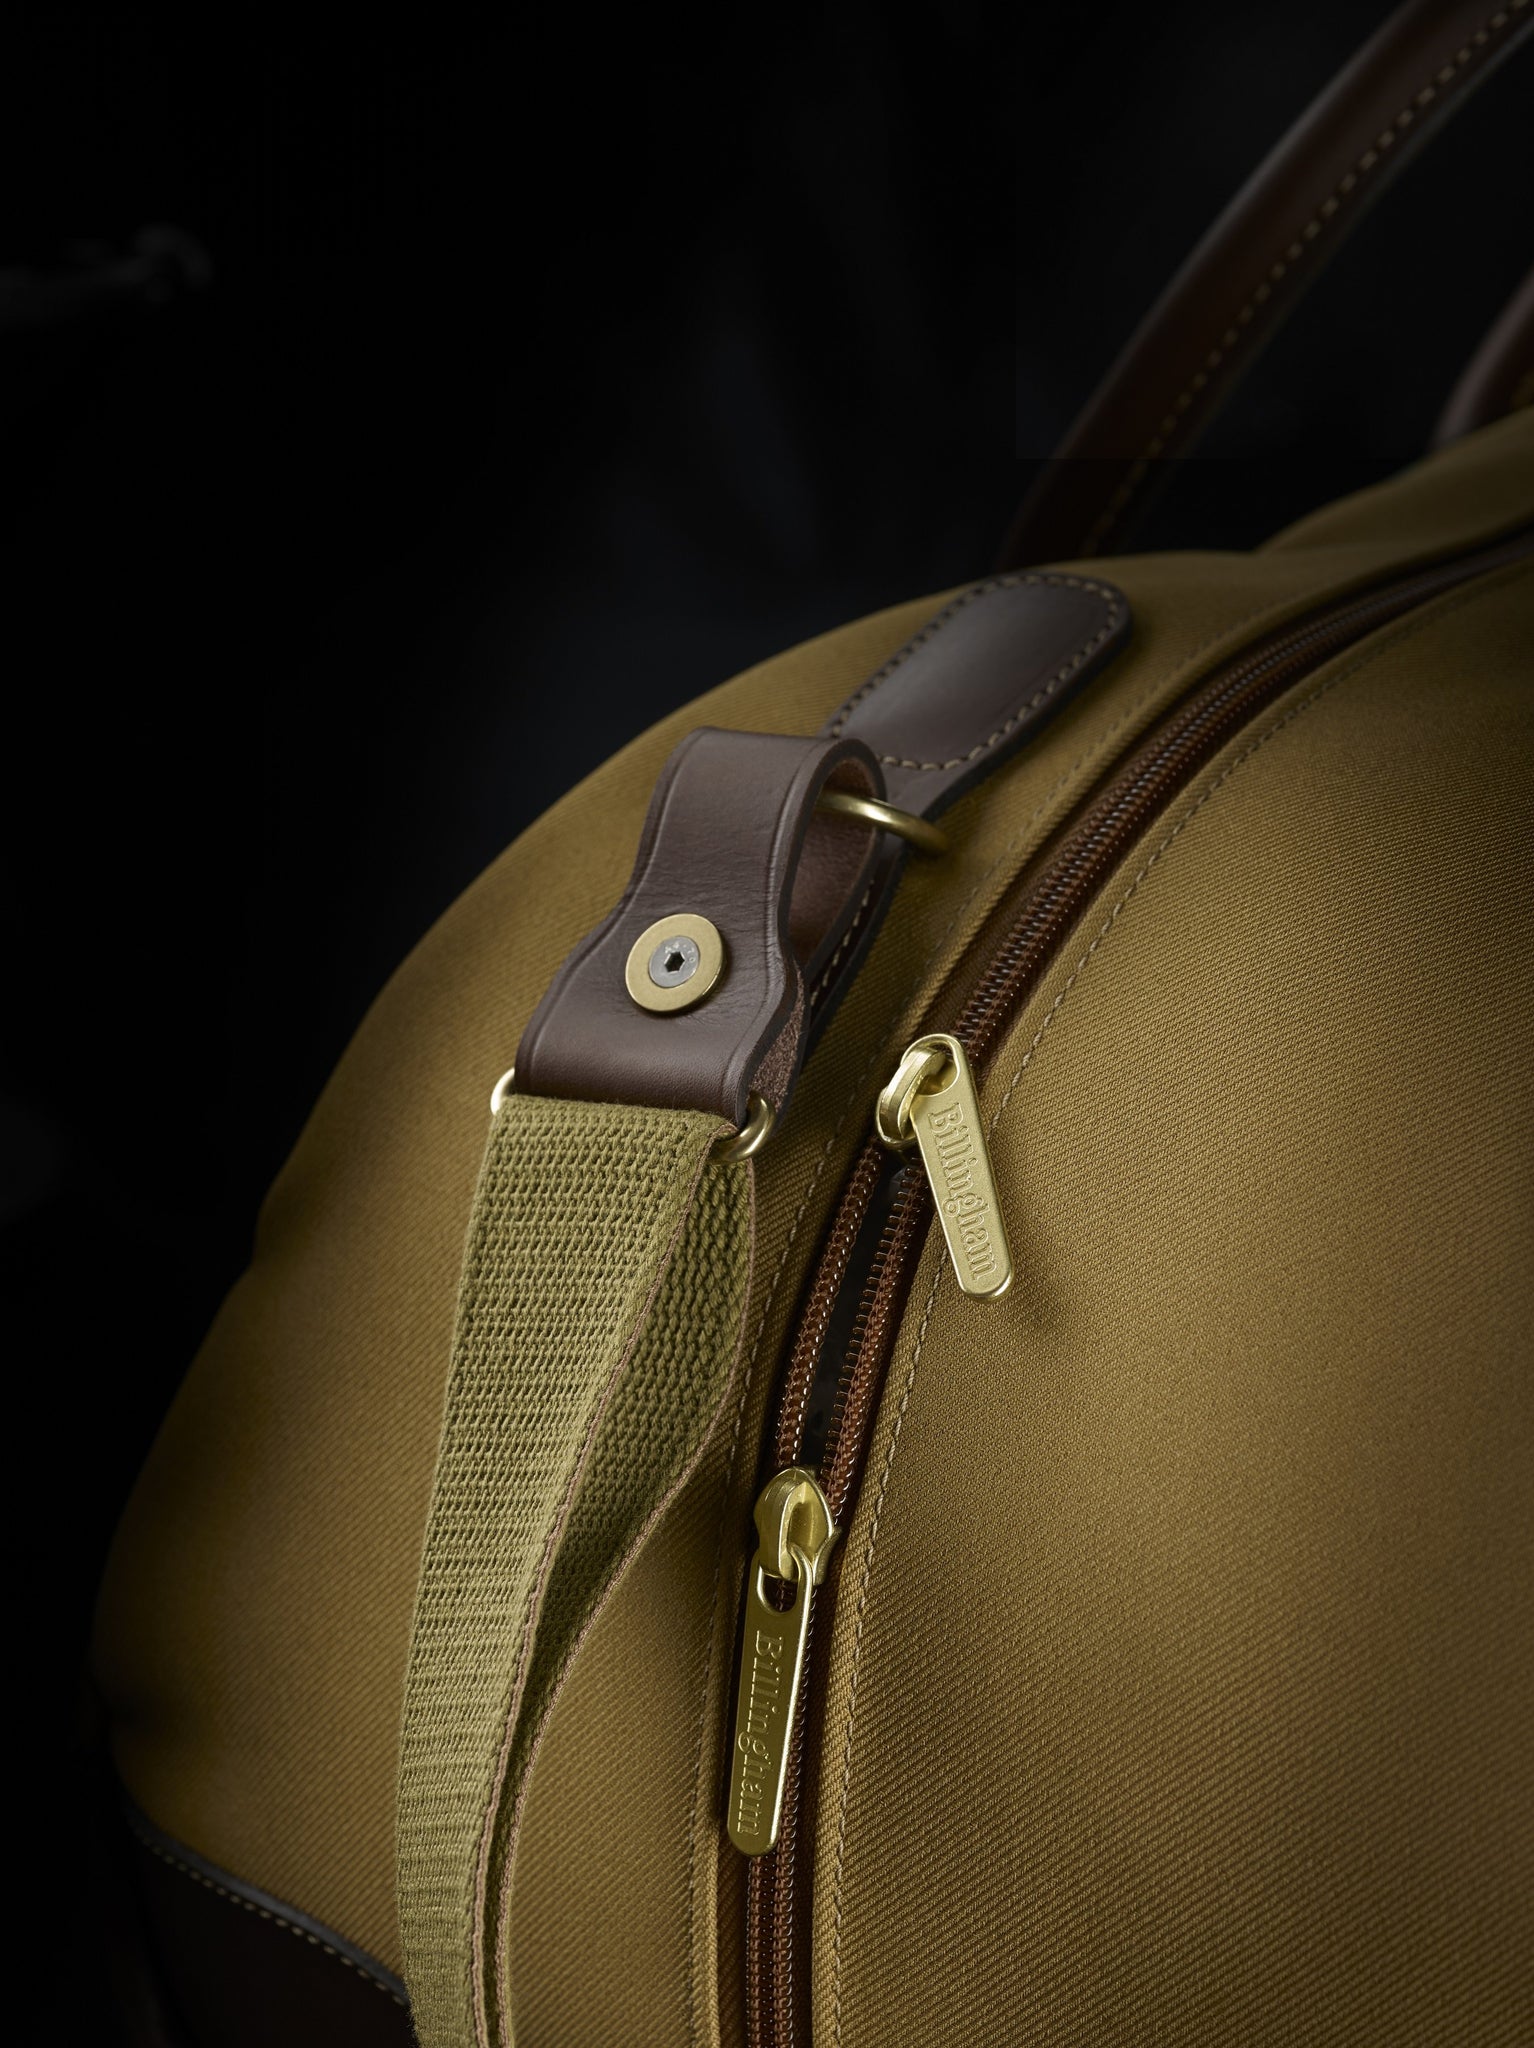 Travel bag weekender size in khaki from Great British travelware experts Billingham, featuring waterproof composition, real grain leather, brass fittings and 5-year guarantee.